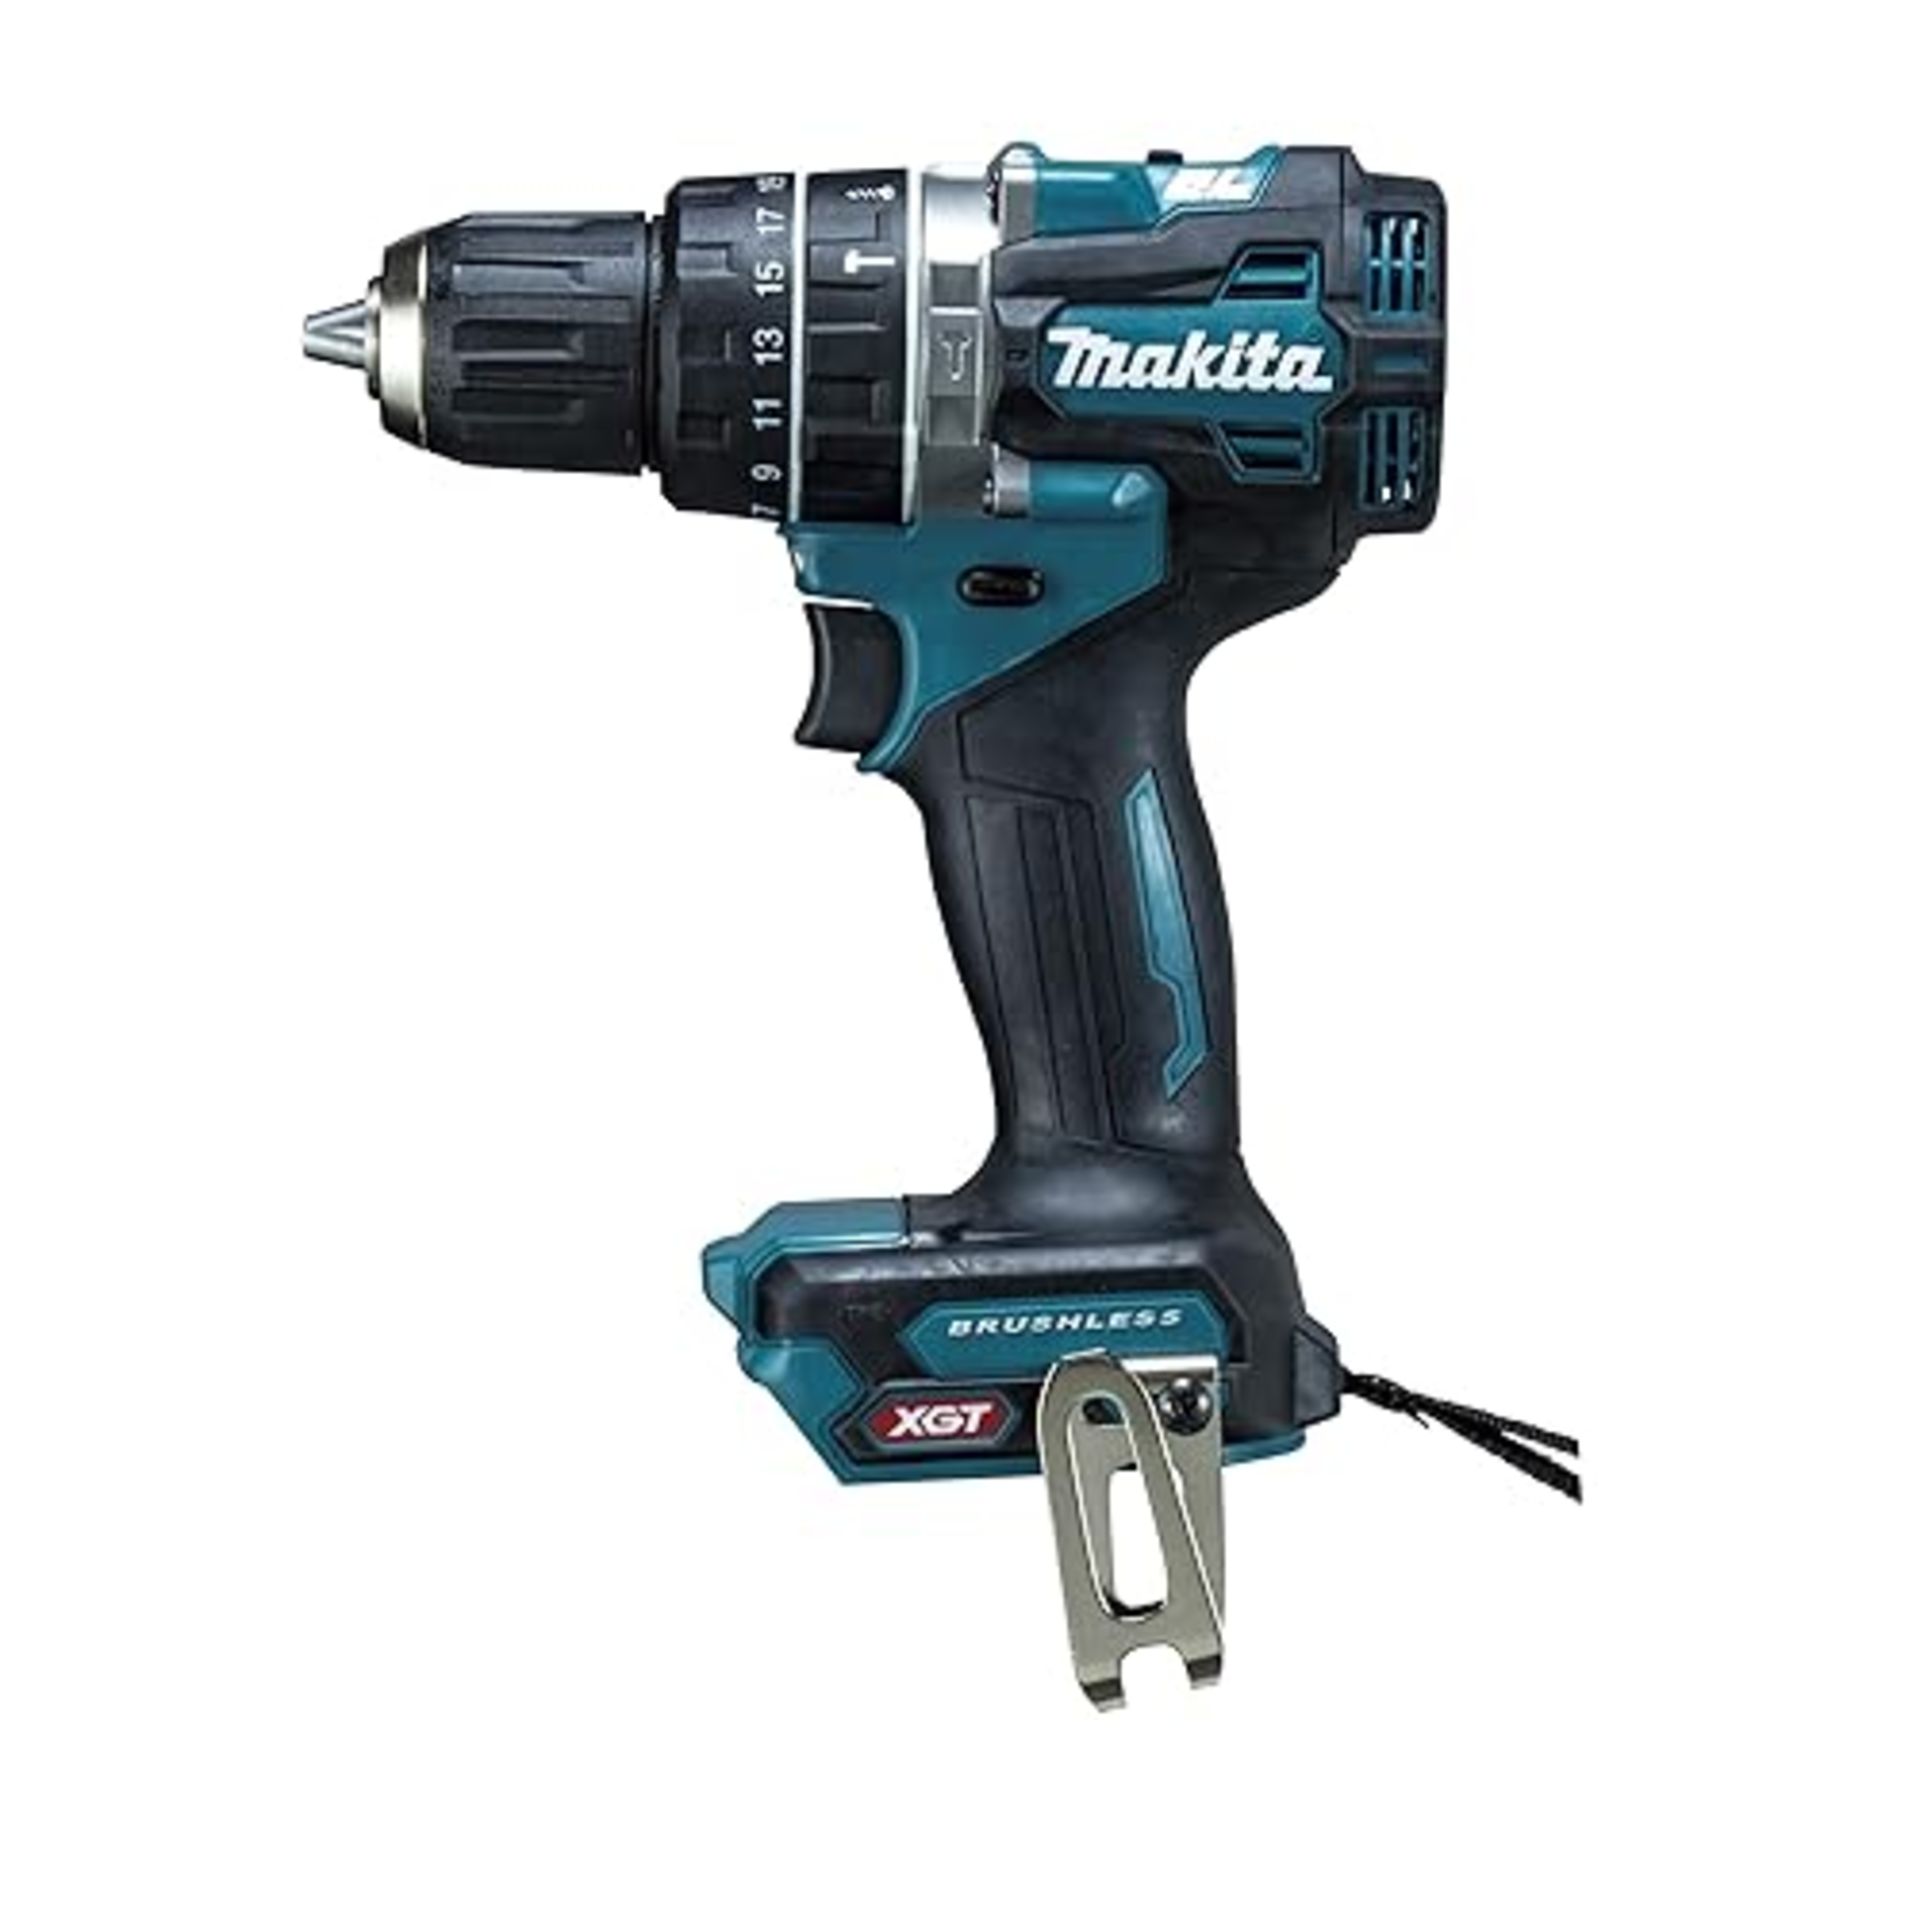 Makita HP002GZ 40V Max Li-ion XGT Brushless Combi Drill - Batteries and Chargers Not Included